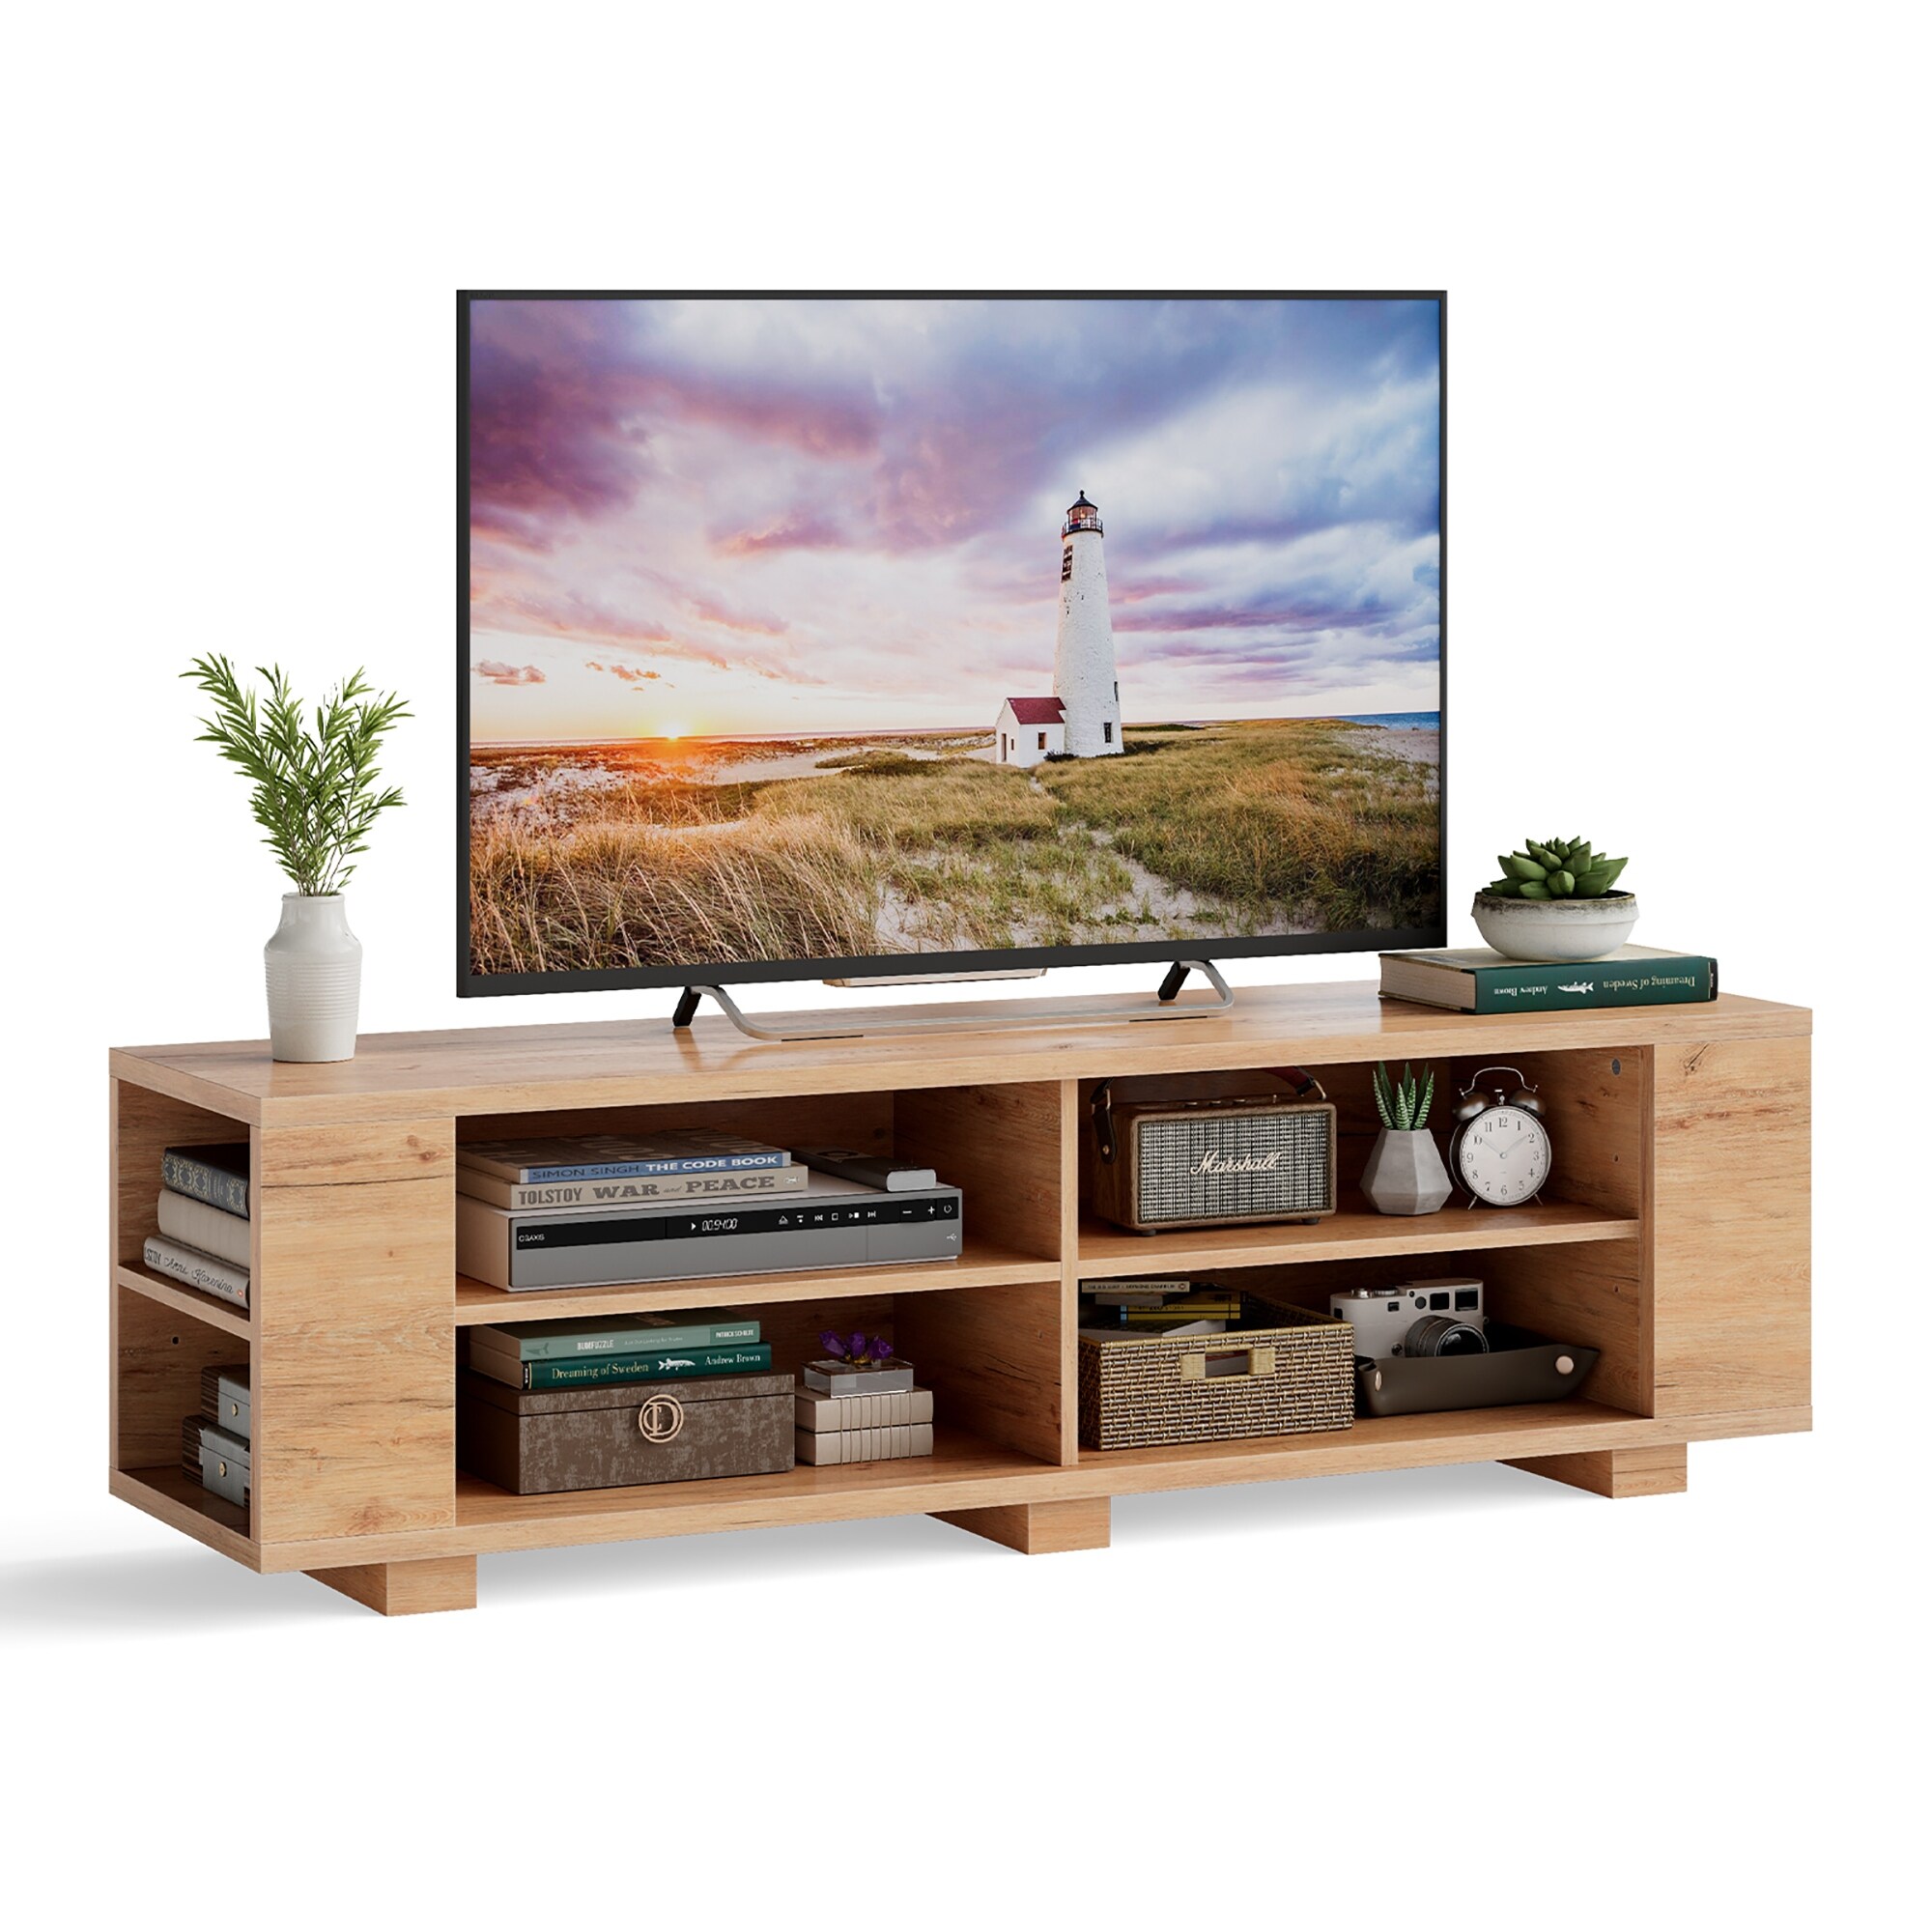 Costway 59'' Wood TV Stand Console Storage Entertainment Media Center